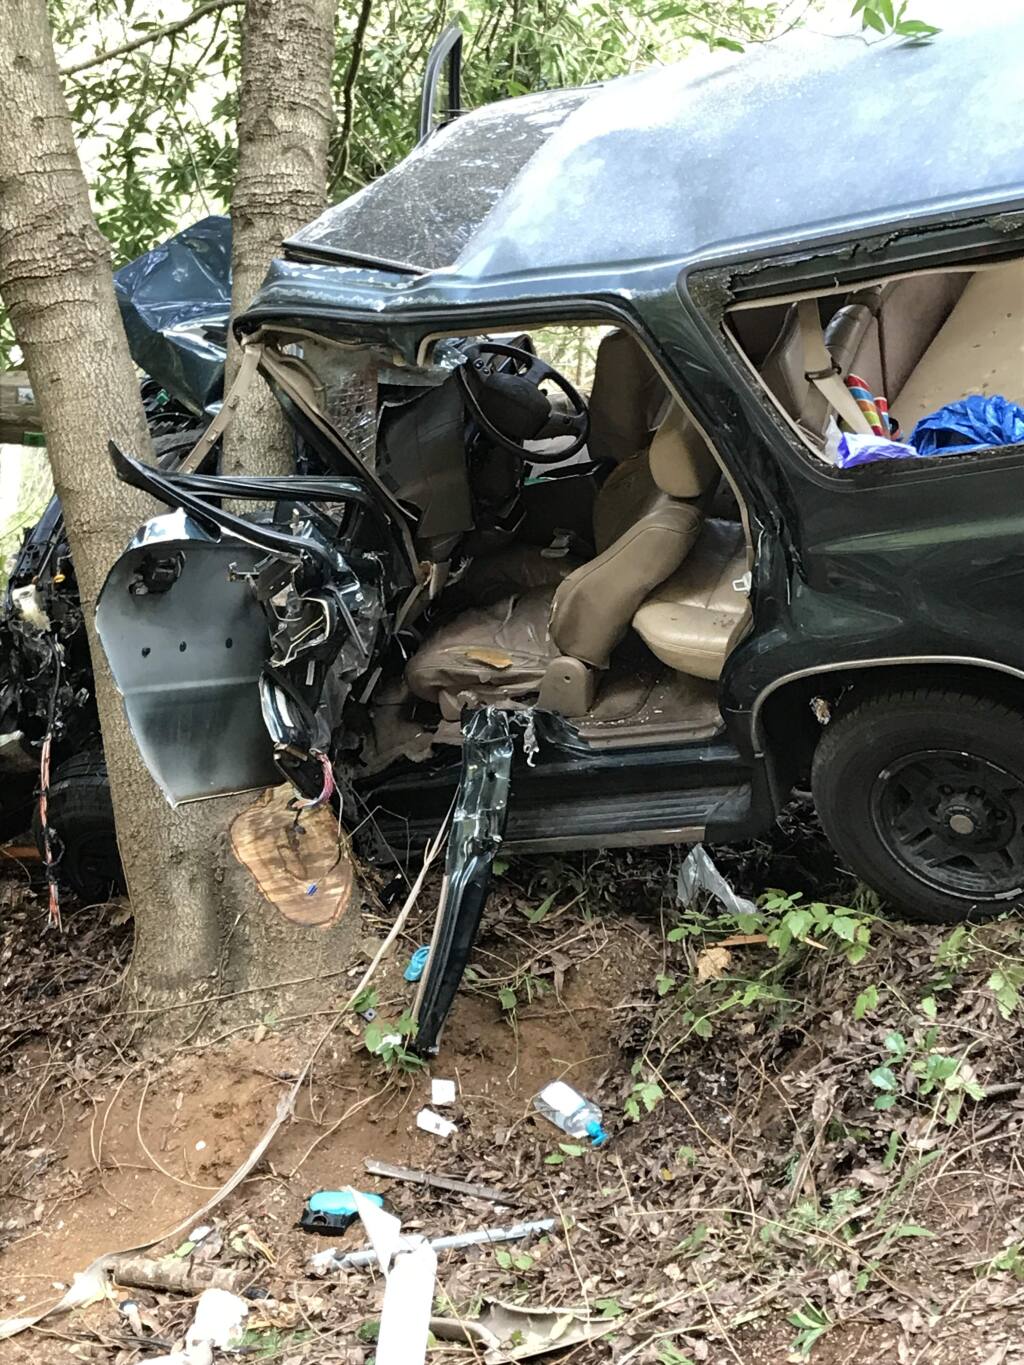 A woman was injured after crashing her vehicle into some trees off Highway 116 in Forestville on Tuesday, Feb. 20, 2018. (COURTESY OF FAVE FRANCESCHI/ FORESTVILLE FIRE PROTECTION DISTRICT)